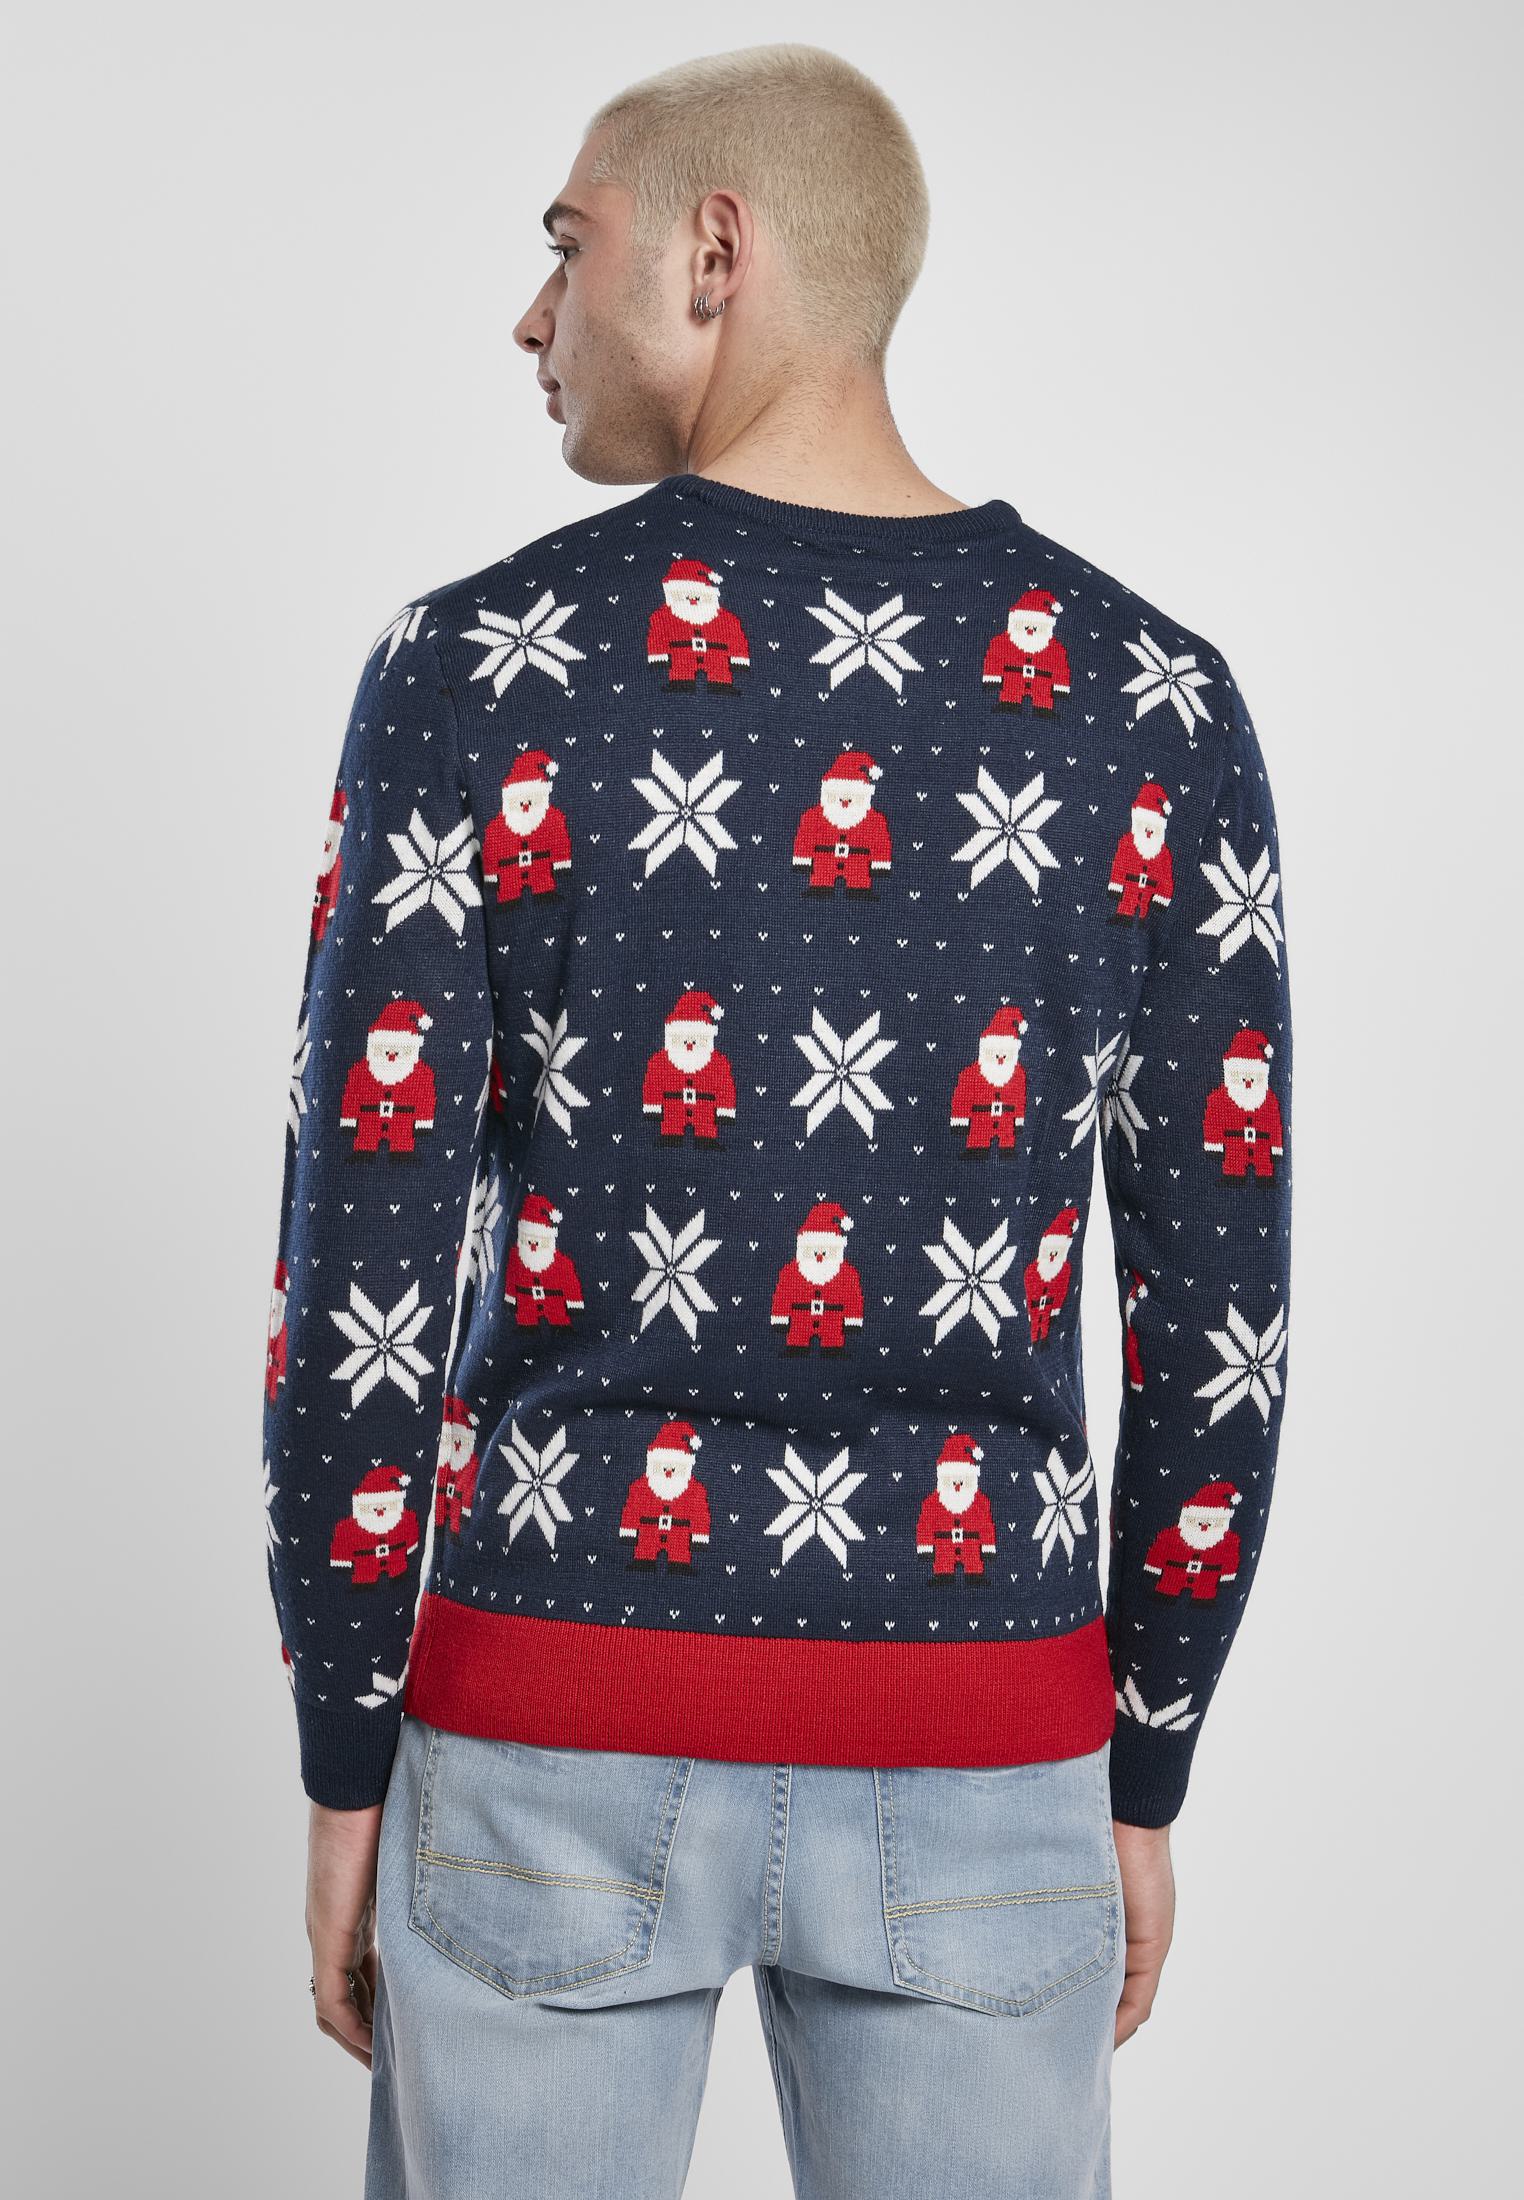 UC Men Nicolaus And Snowflakes Sweater (Farbe: nicolaus and snowflake aop / Größe: S)